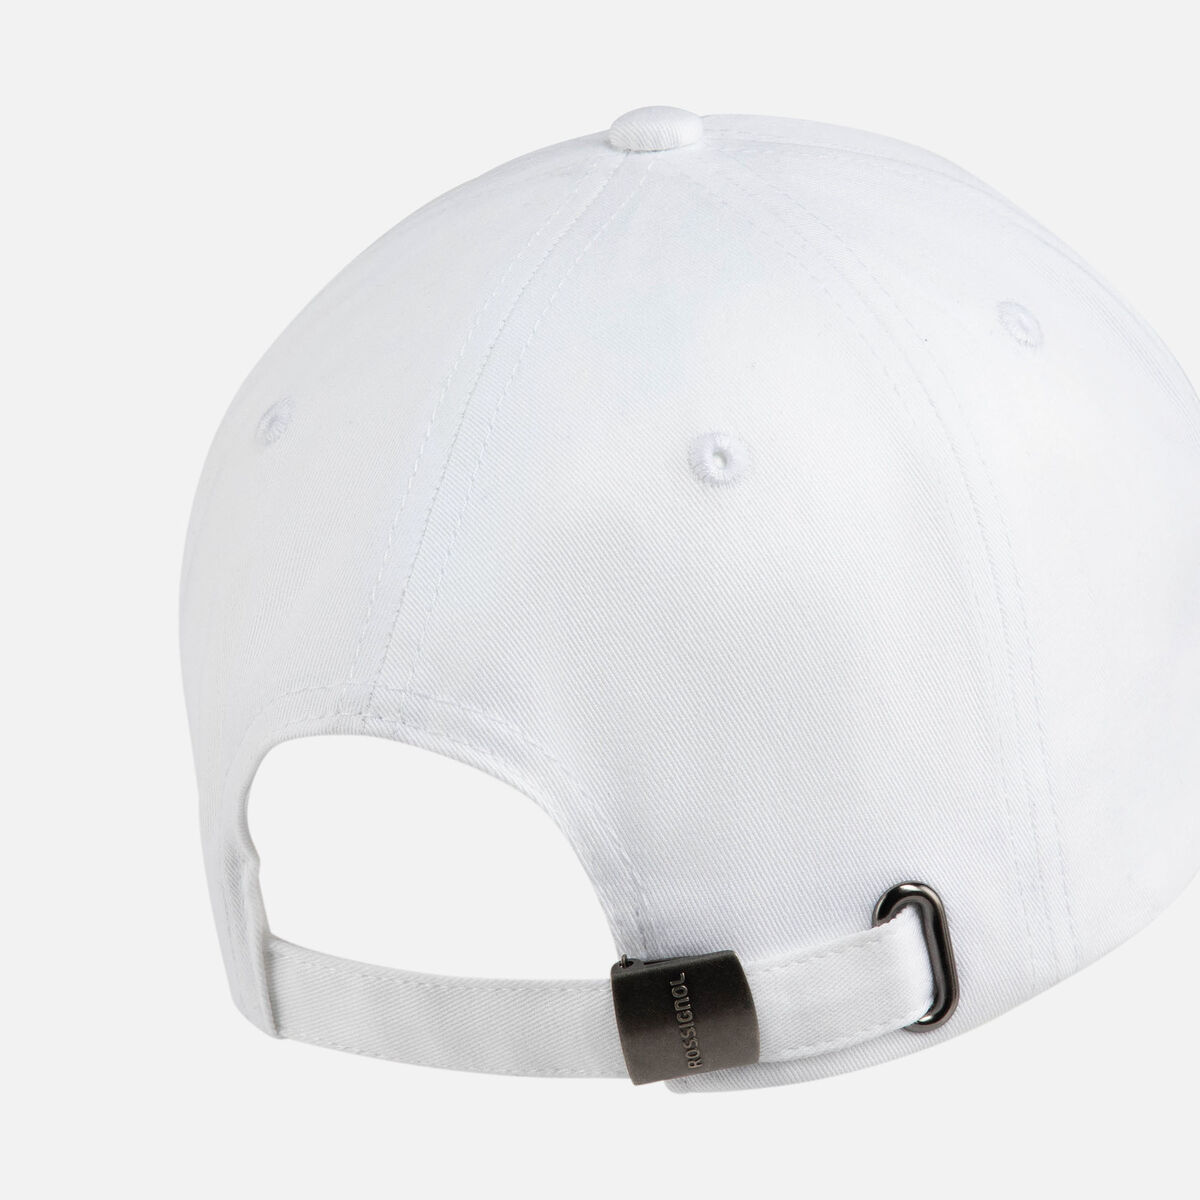 Rossignol Gorra Corporate Rooster White